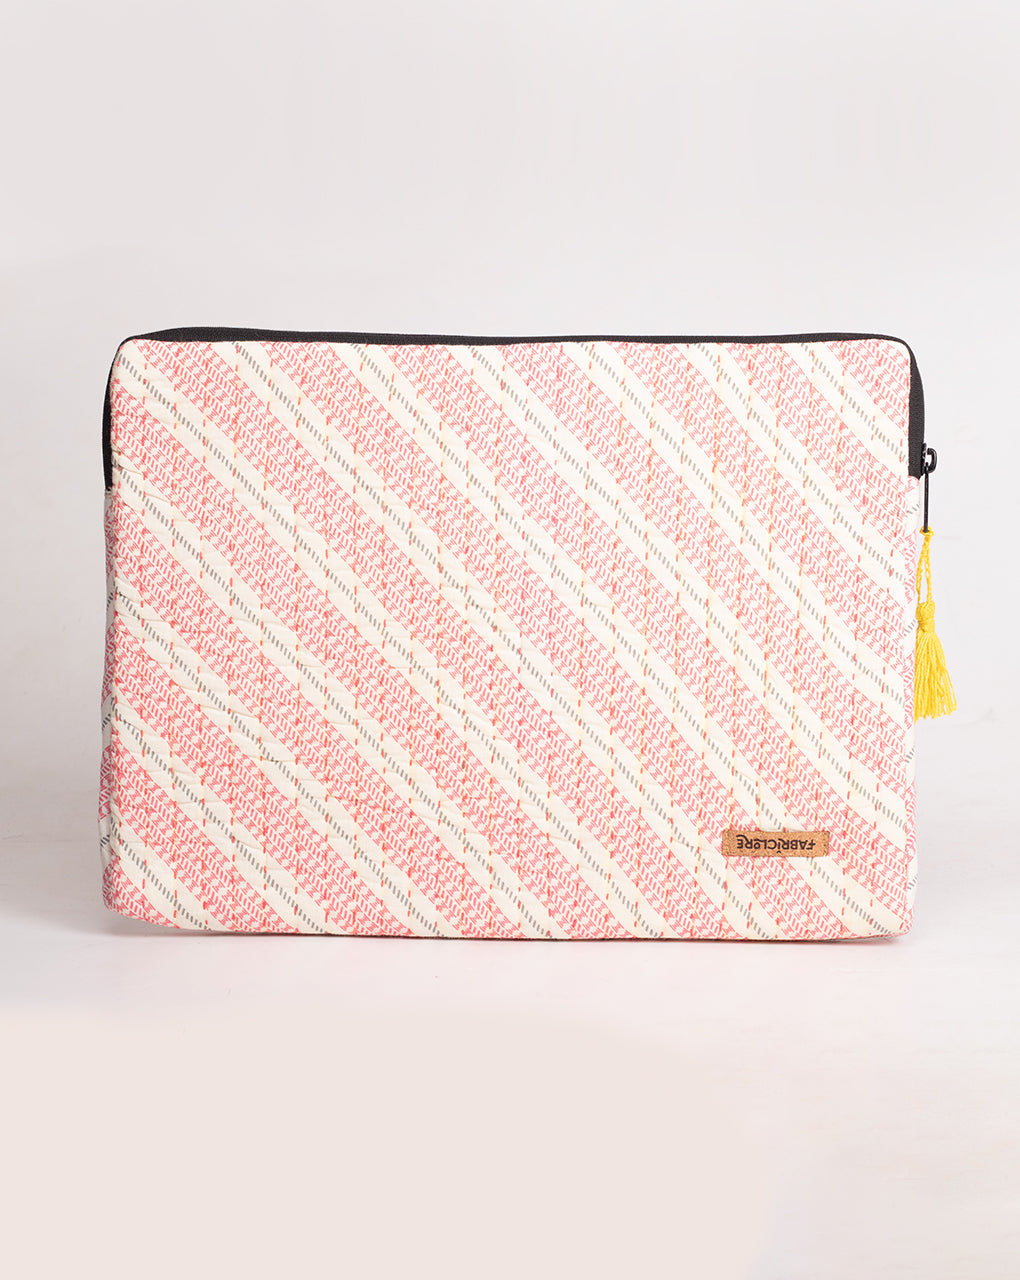 Stripes Kantha Quilted Laptop Sleeve - Fabriclore.com